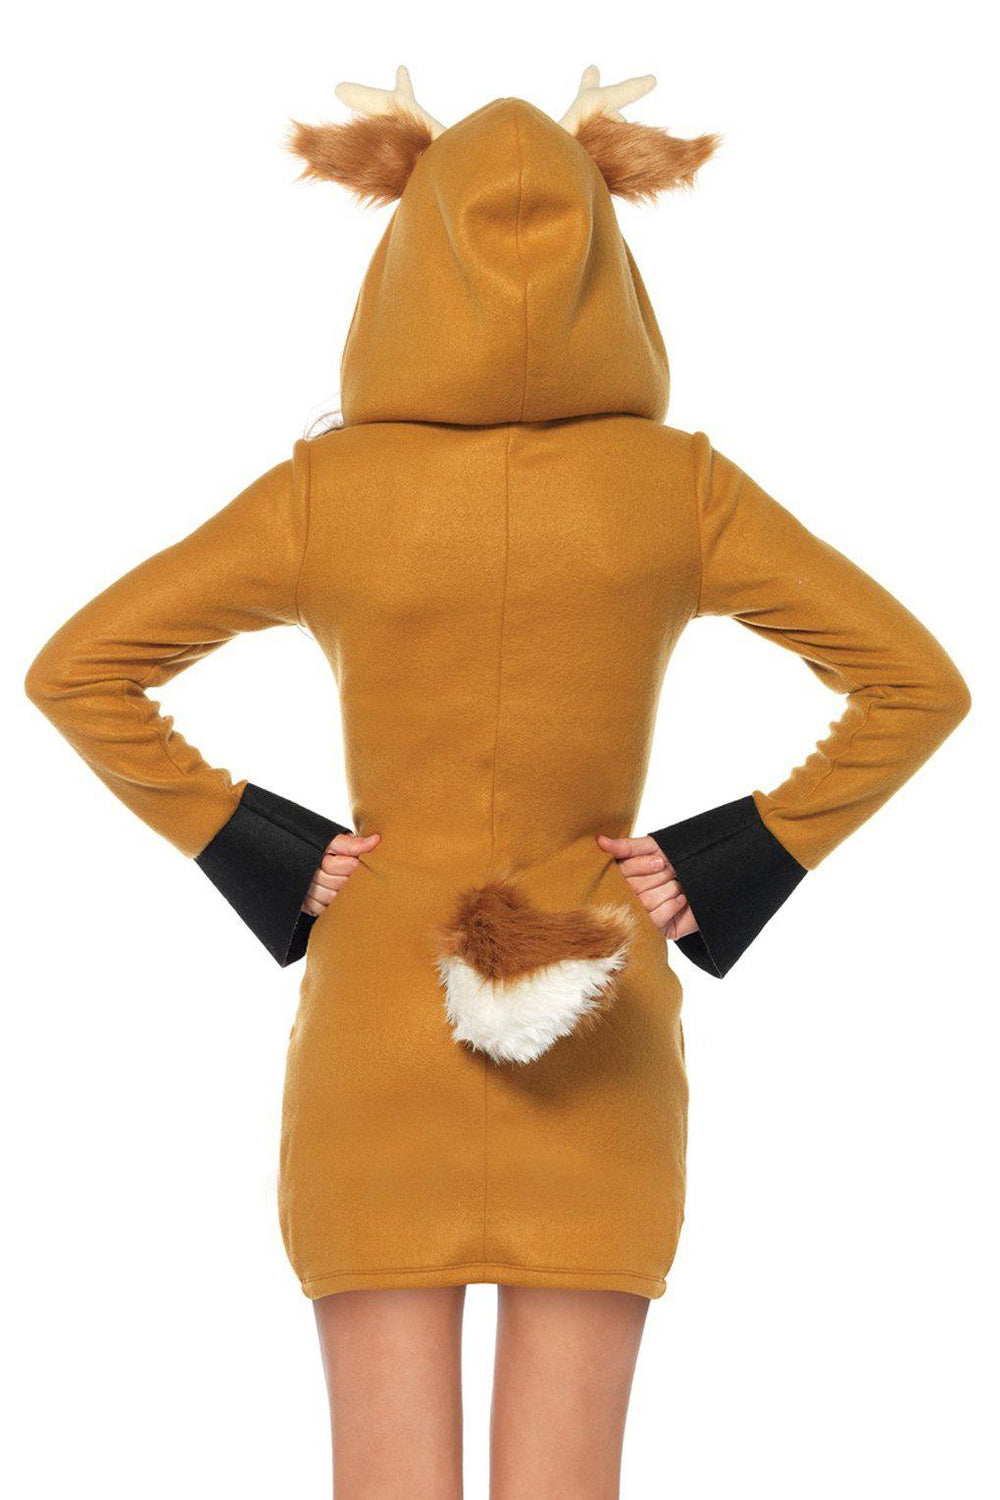 Sexy Fawn Costume Dress-Animal Costumes-Leg Avenue-SEXYSHOES.COM